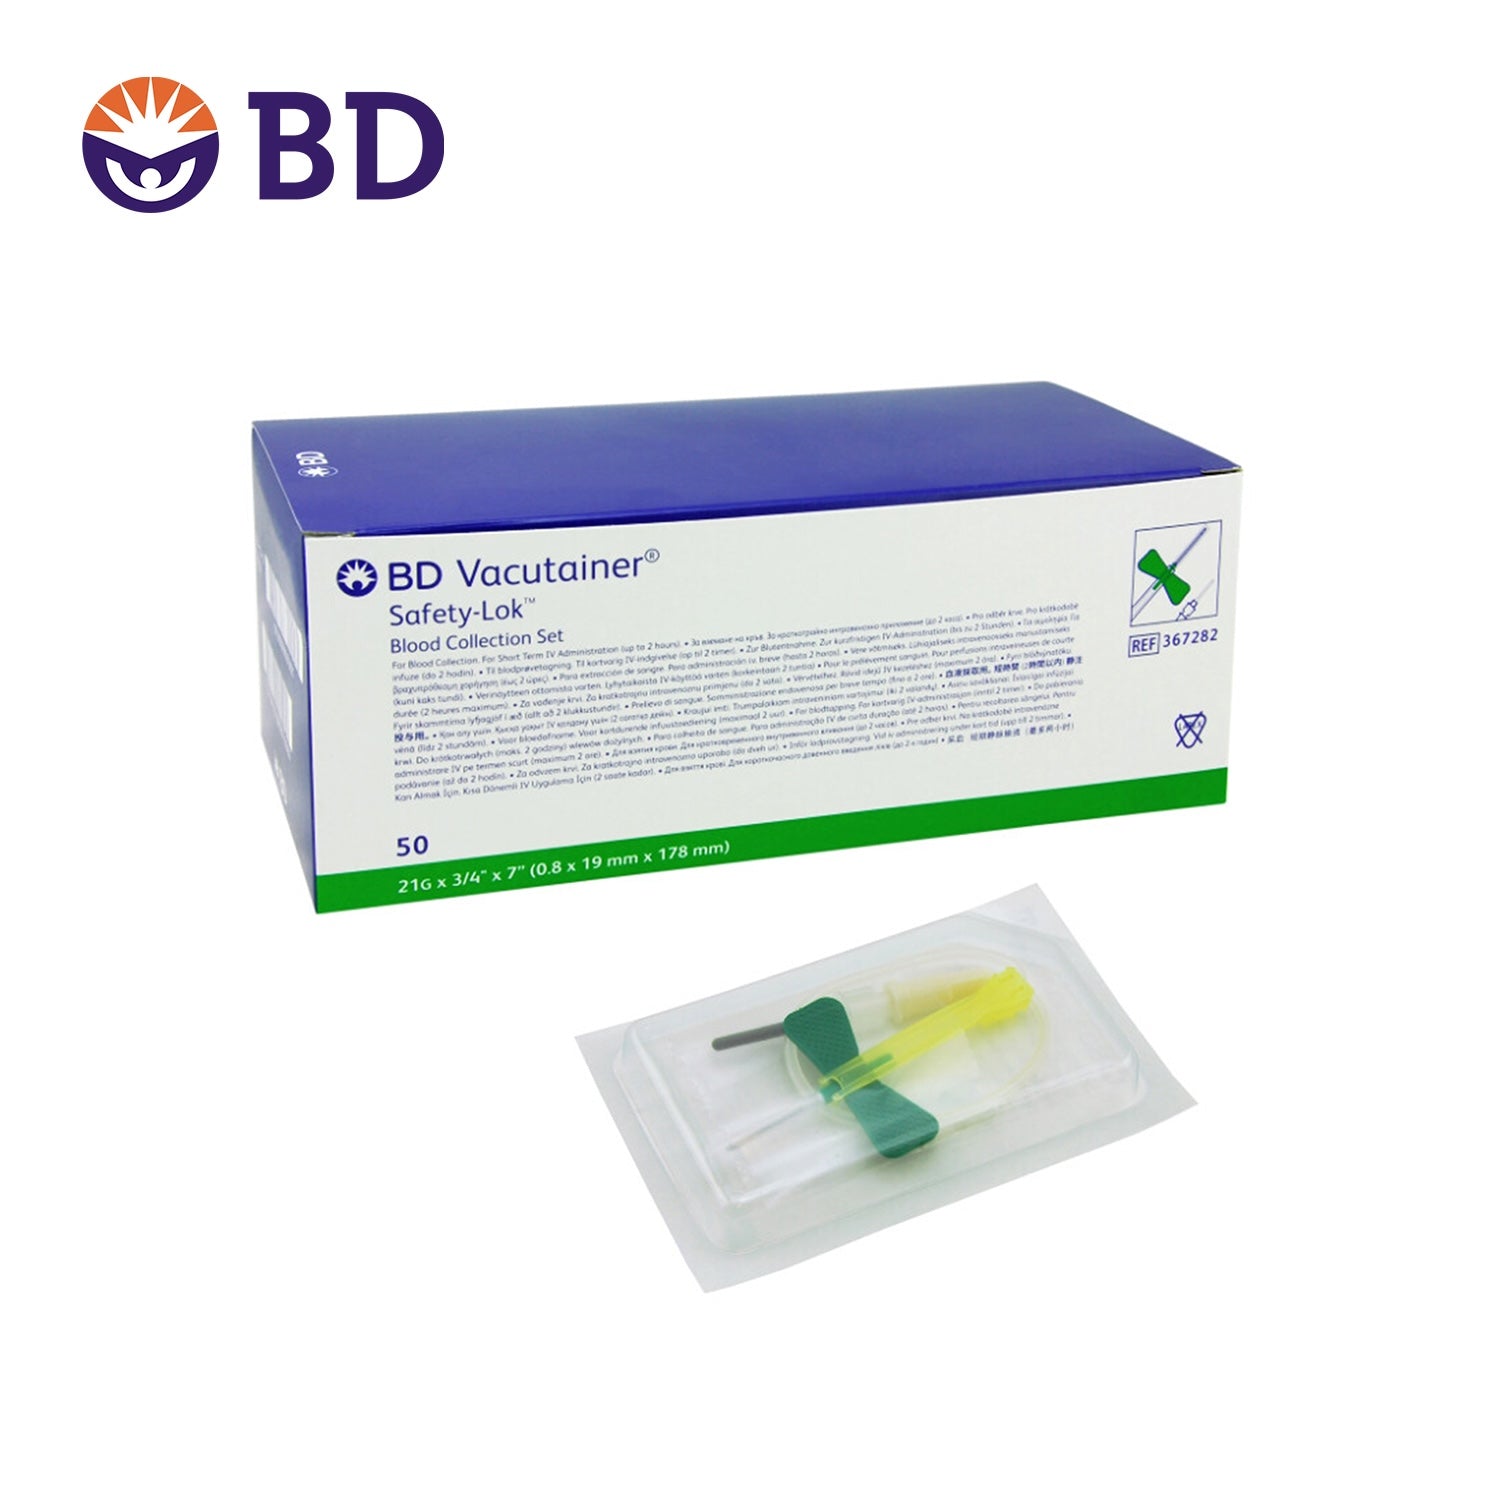 BD Vacutainer Safety Lok Blood Collection System | 0.75" Needle | 21G x 7" Tubing | Pack of 50 (2)